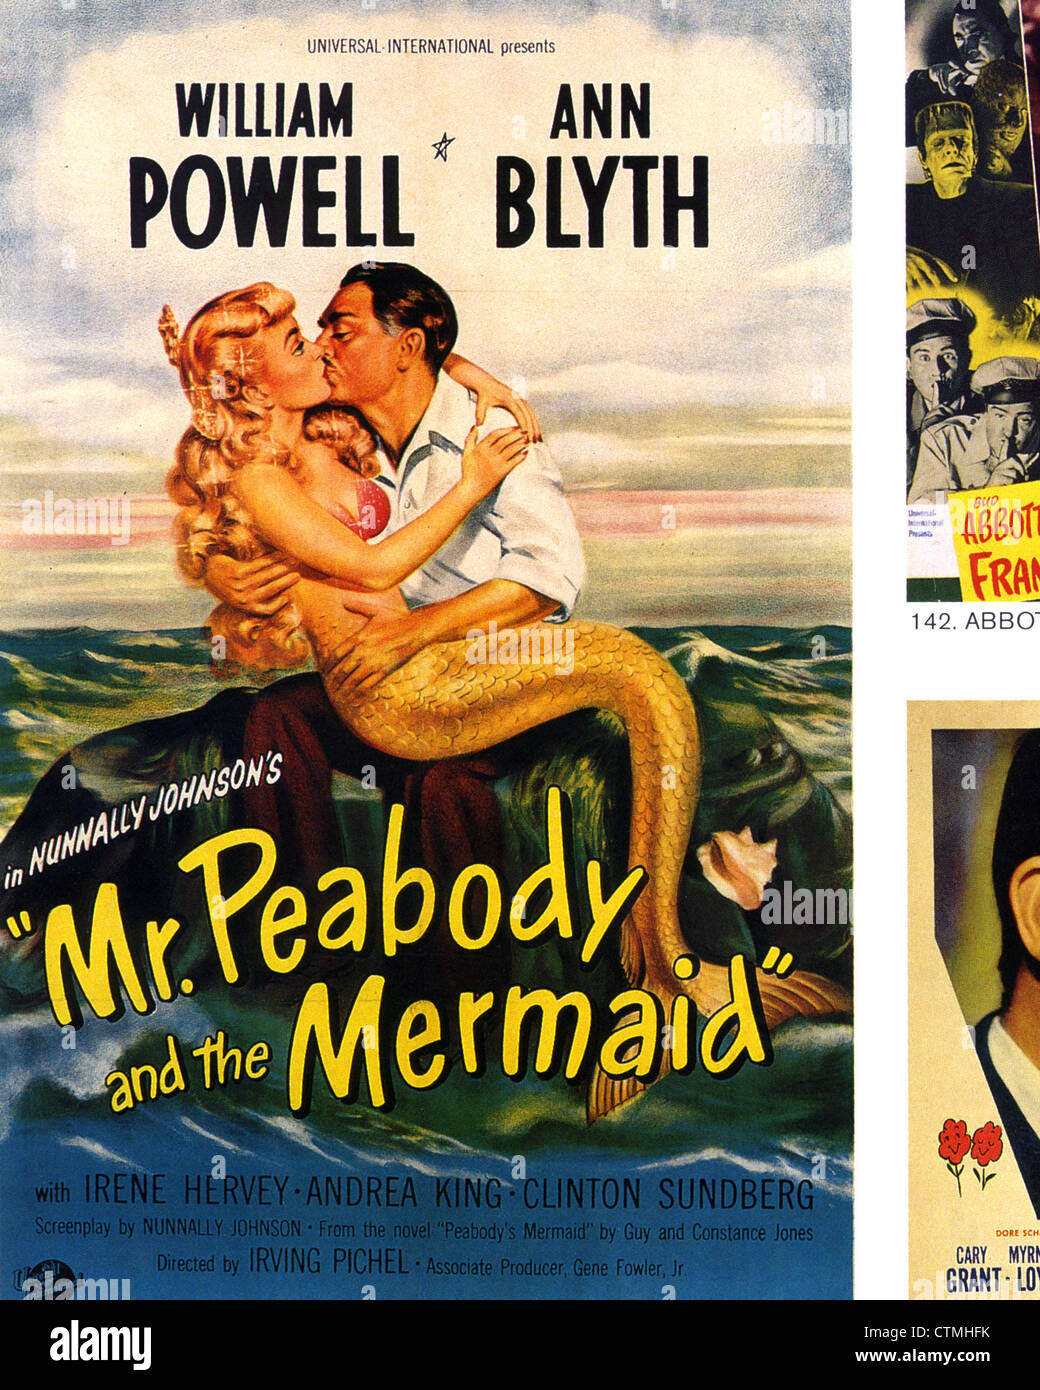 MR PEABODY AND THE MERMAID Poster for 1949 Universal International film with William Powell and Ann Blyth Stock Photo